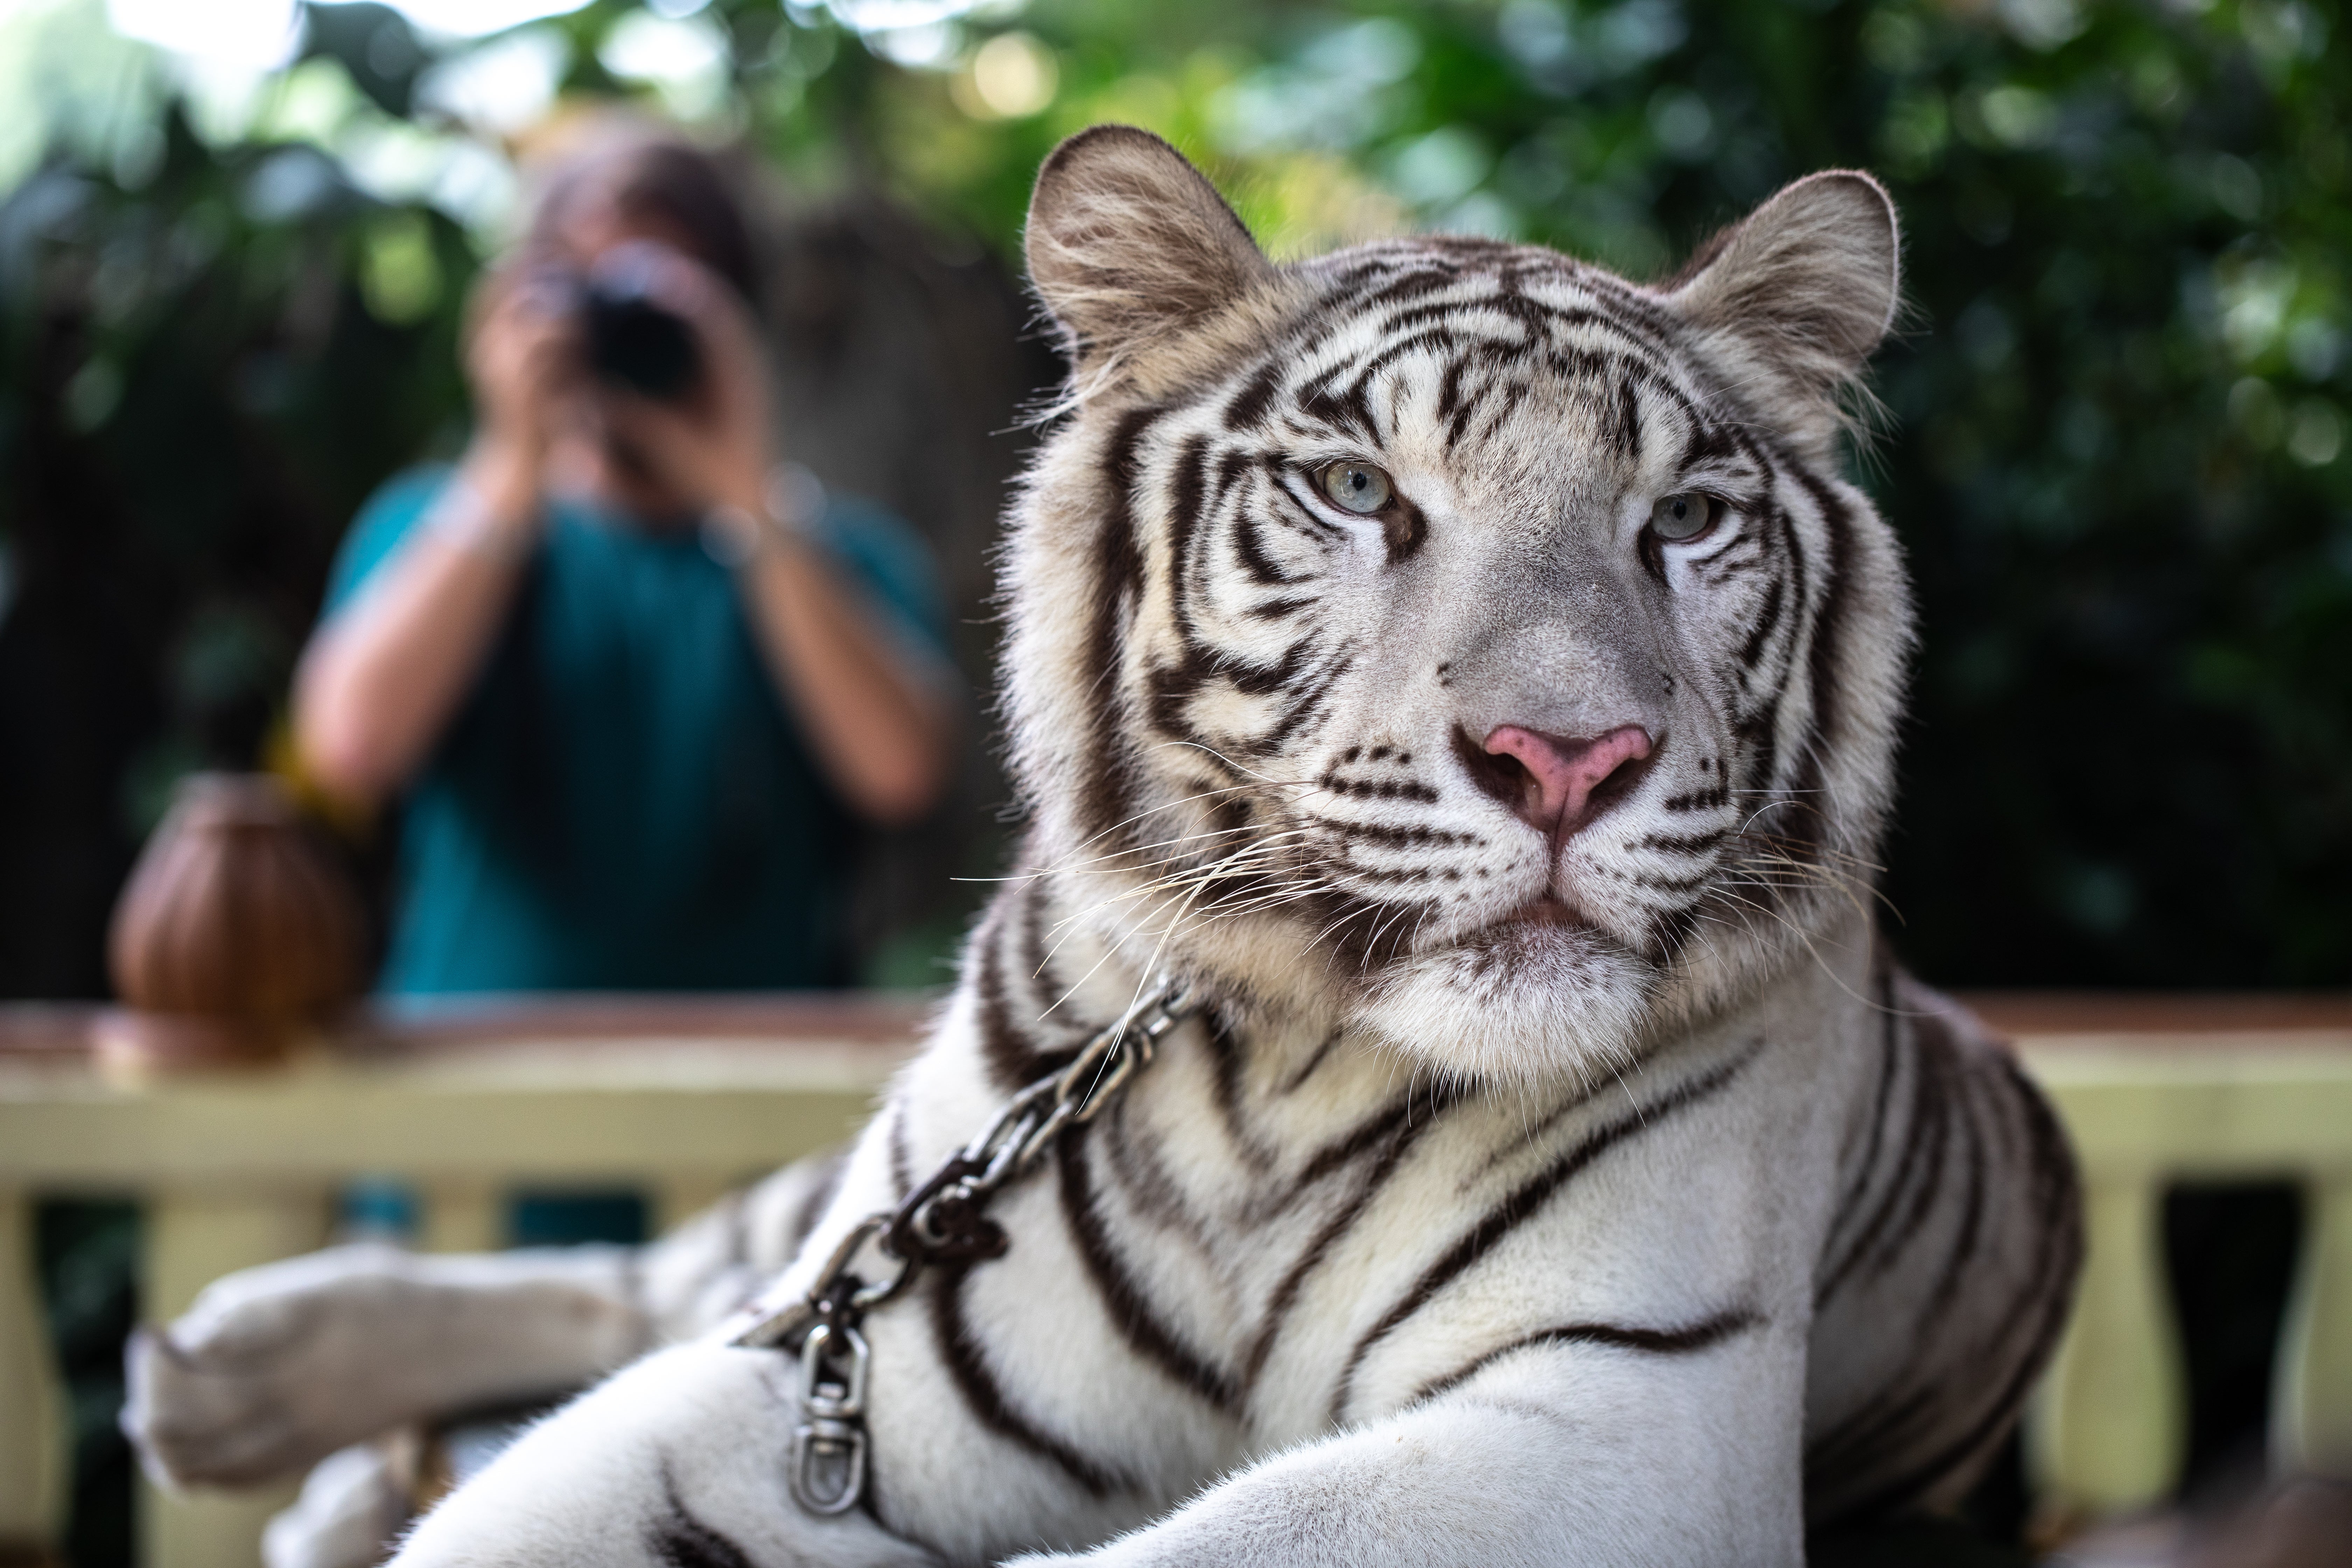 This new Google feature allows you to click photos with tiger